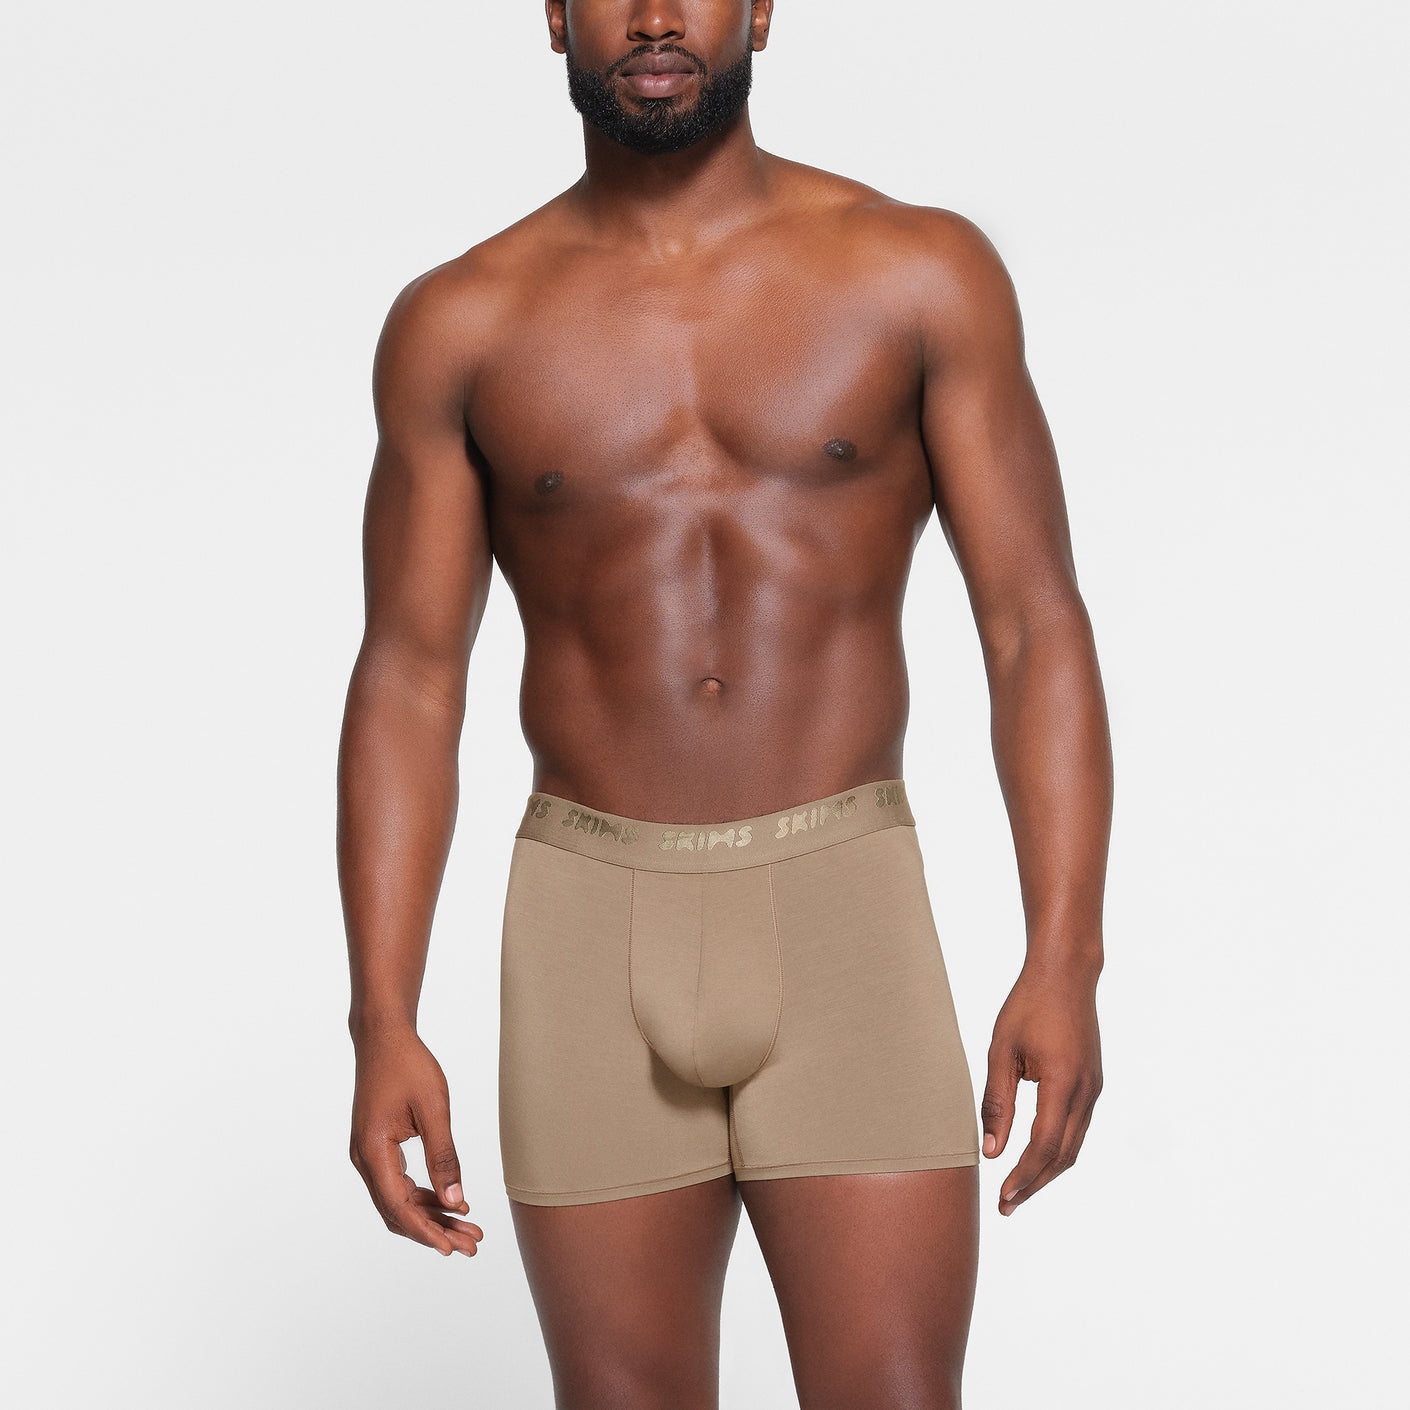 To Do List: Personalized Boxer Briefs